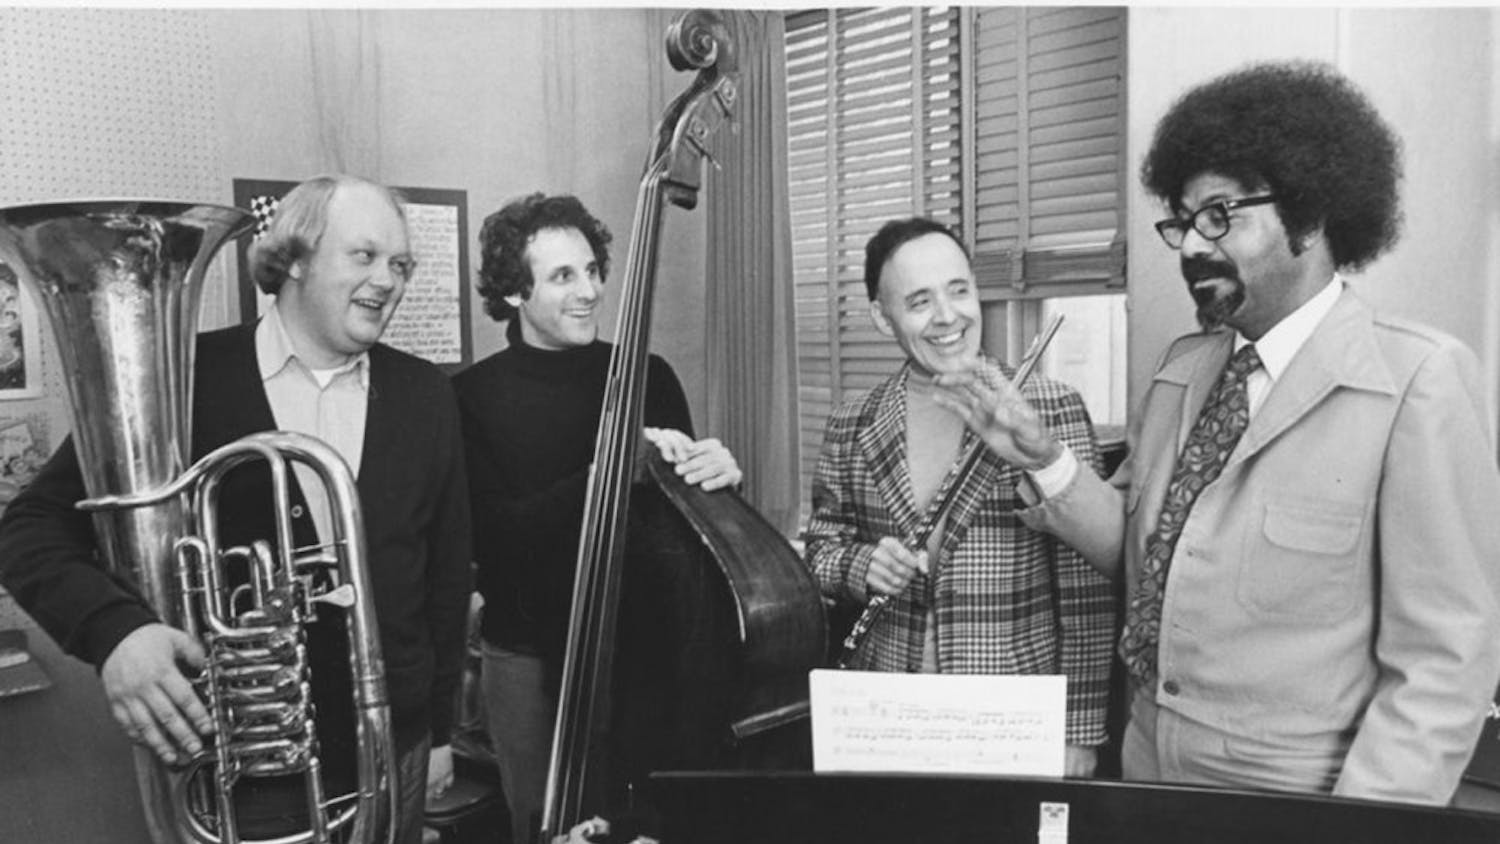 An IU News Bureau release dated March 5, 1980, accompanies this image. It reads, in part: "....they prepare for a concert featuring the bass at 8:30 p.m.Monday, March 10, in the Indiana University Bloomington Recital Hall..."